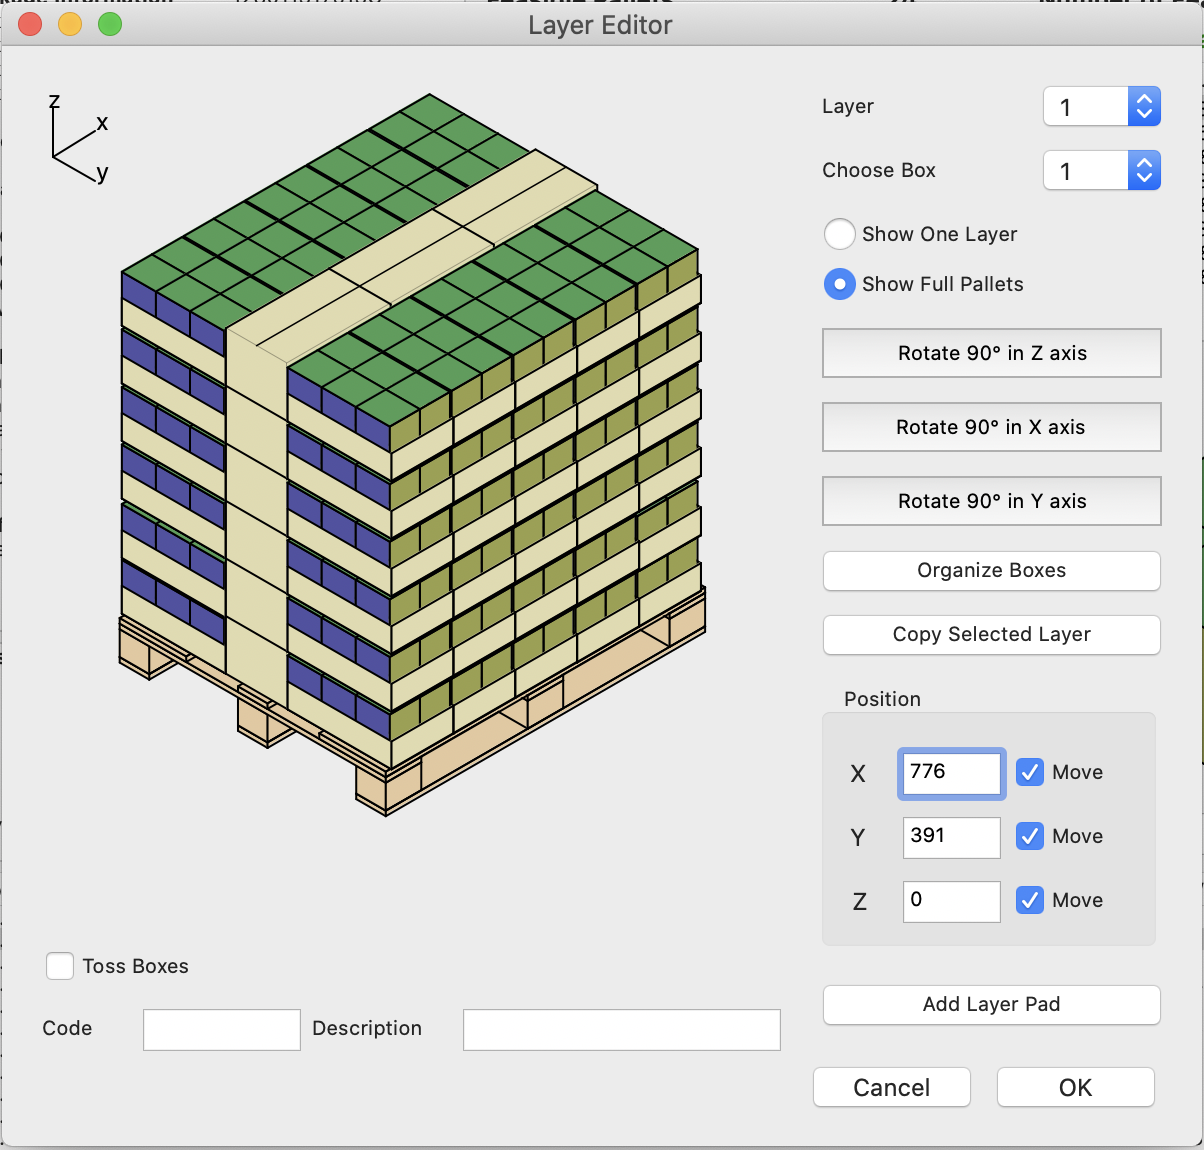 Full Pallet in Layer Editor